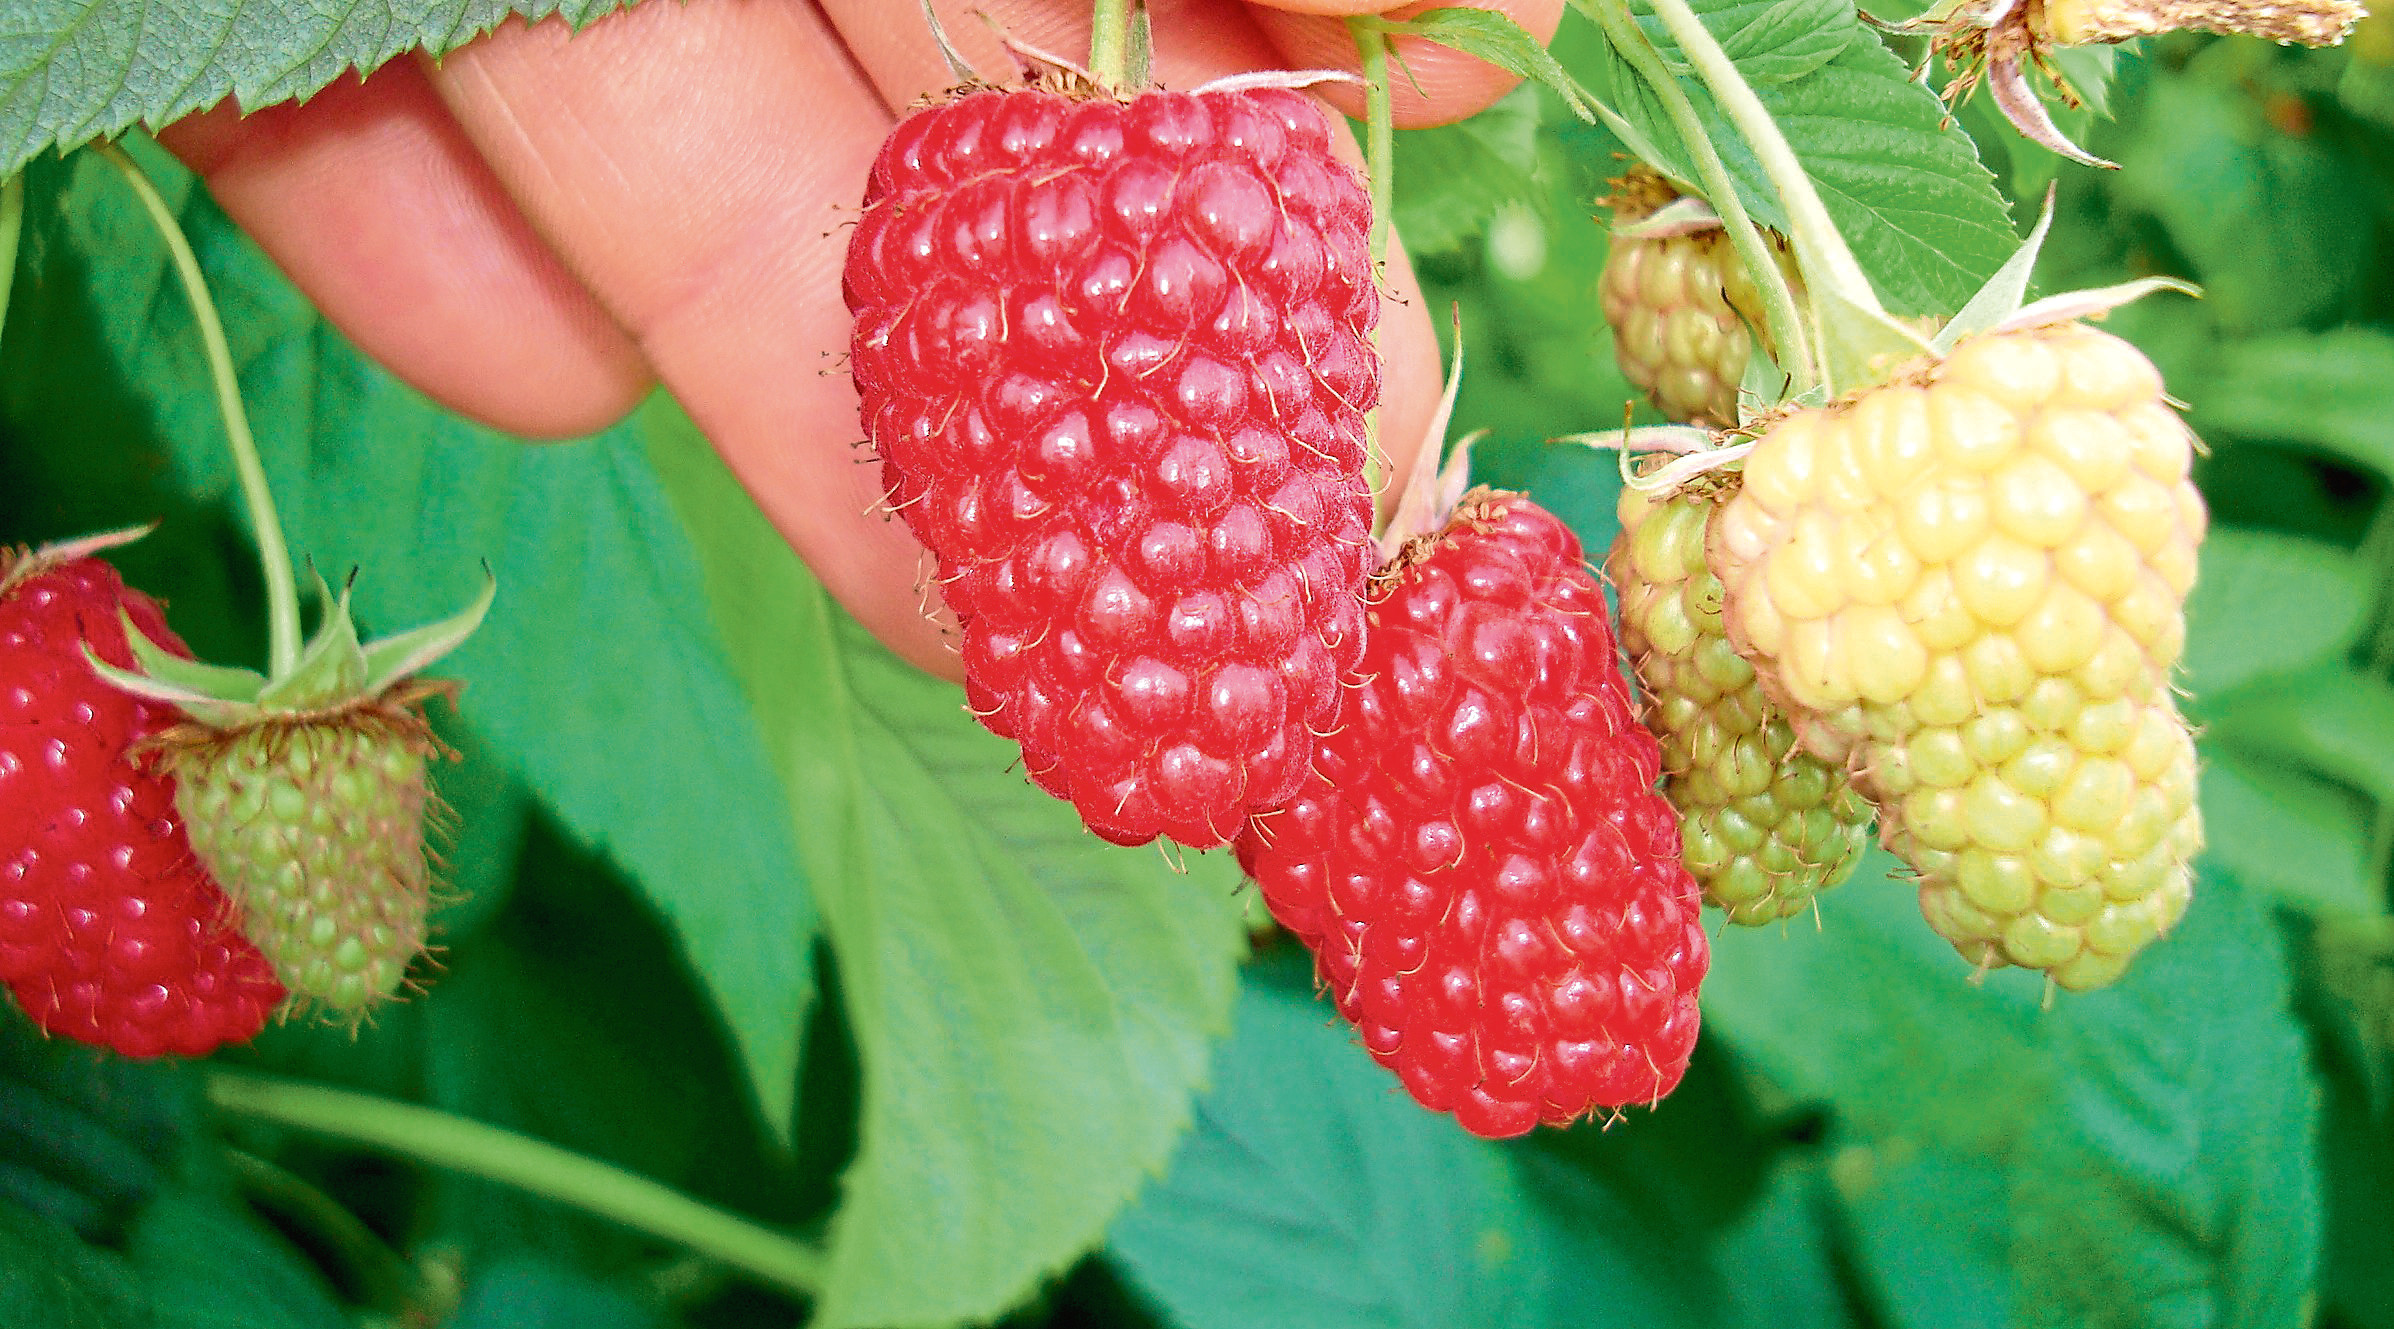 The firm is investing to create new varieties of soft fruit.